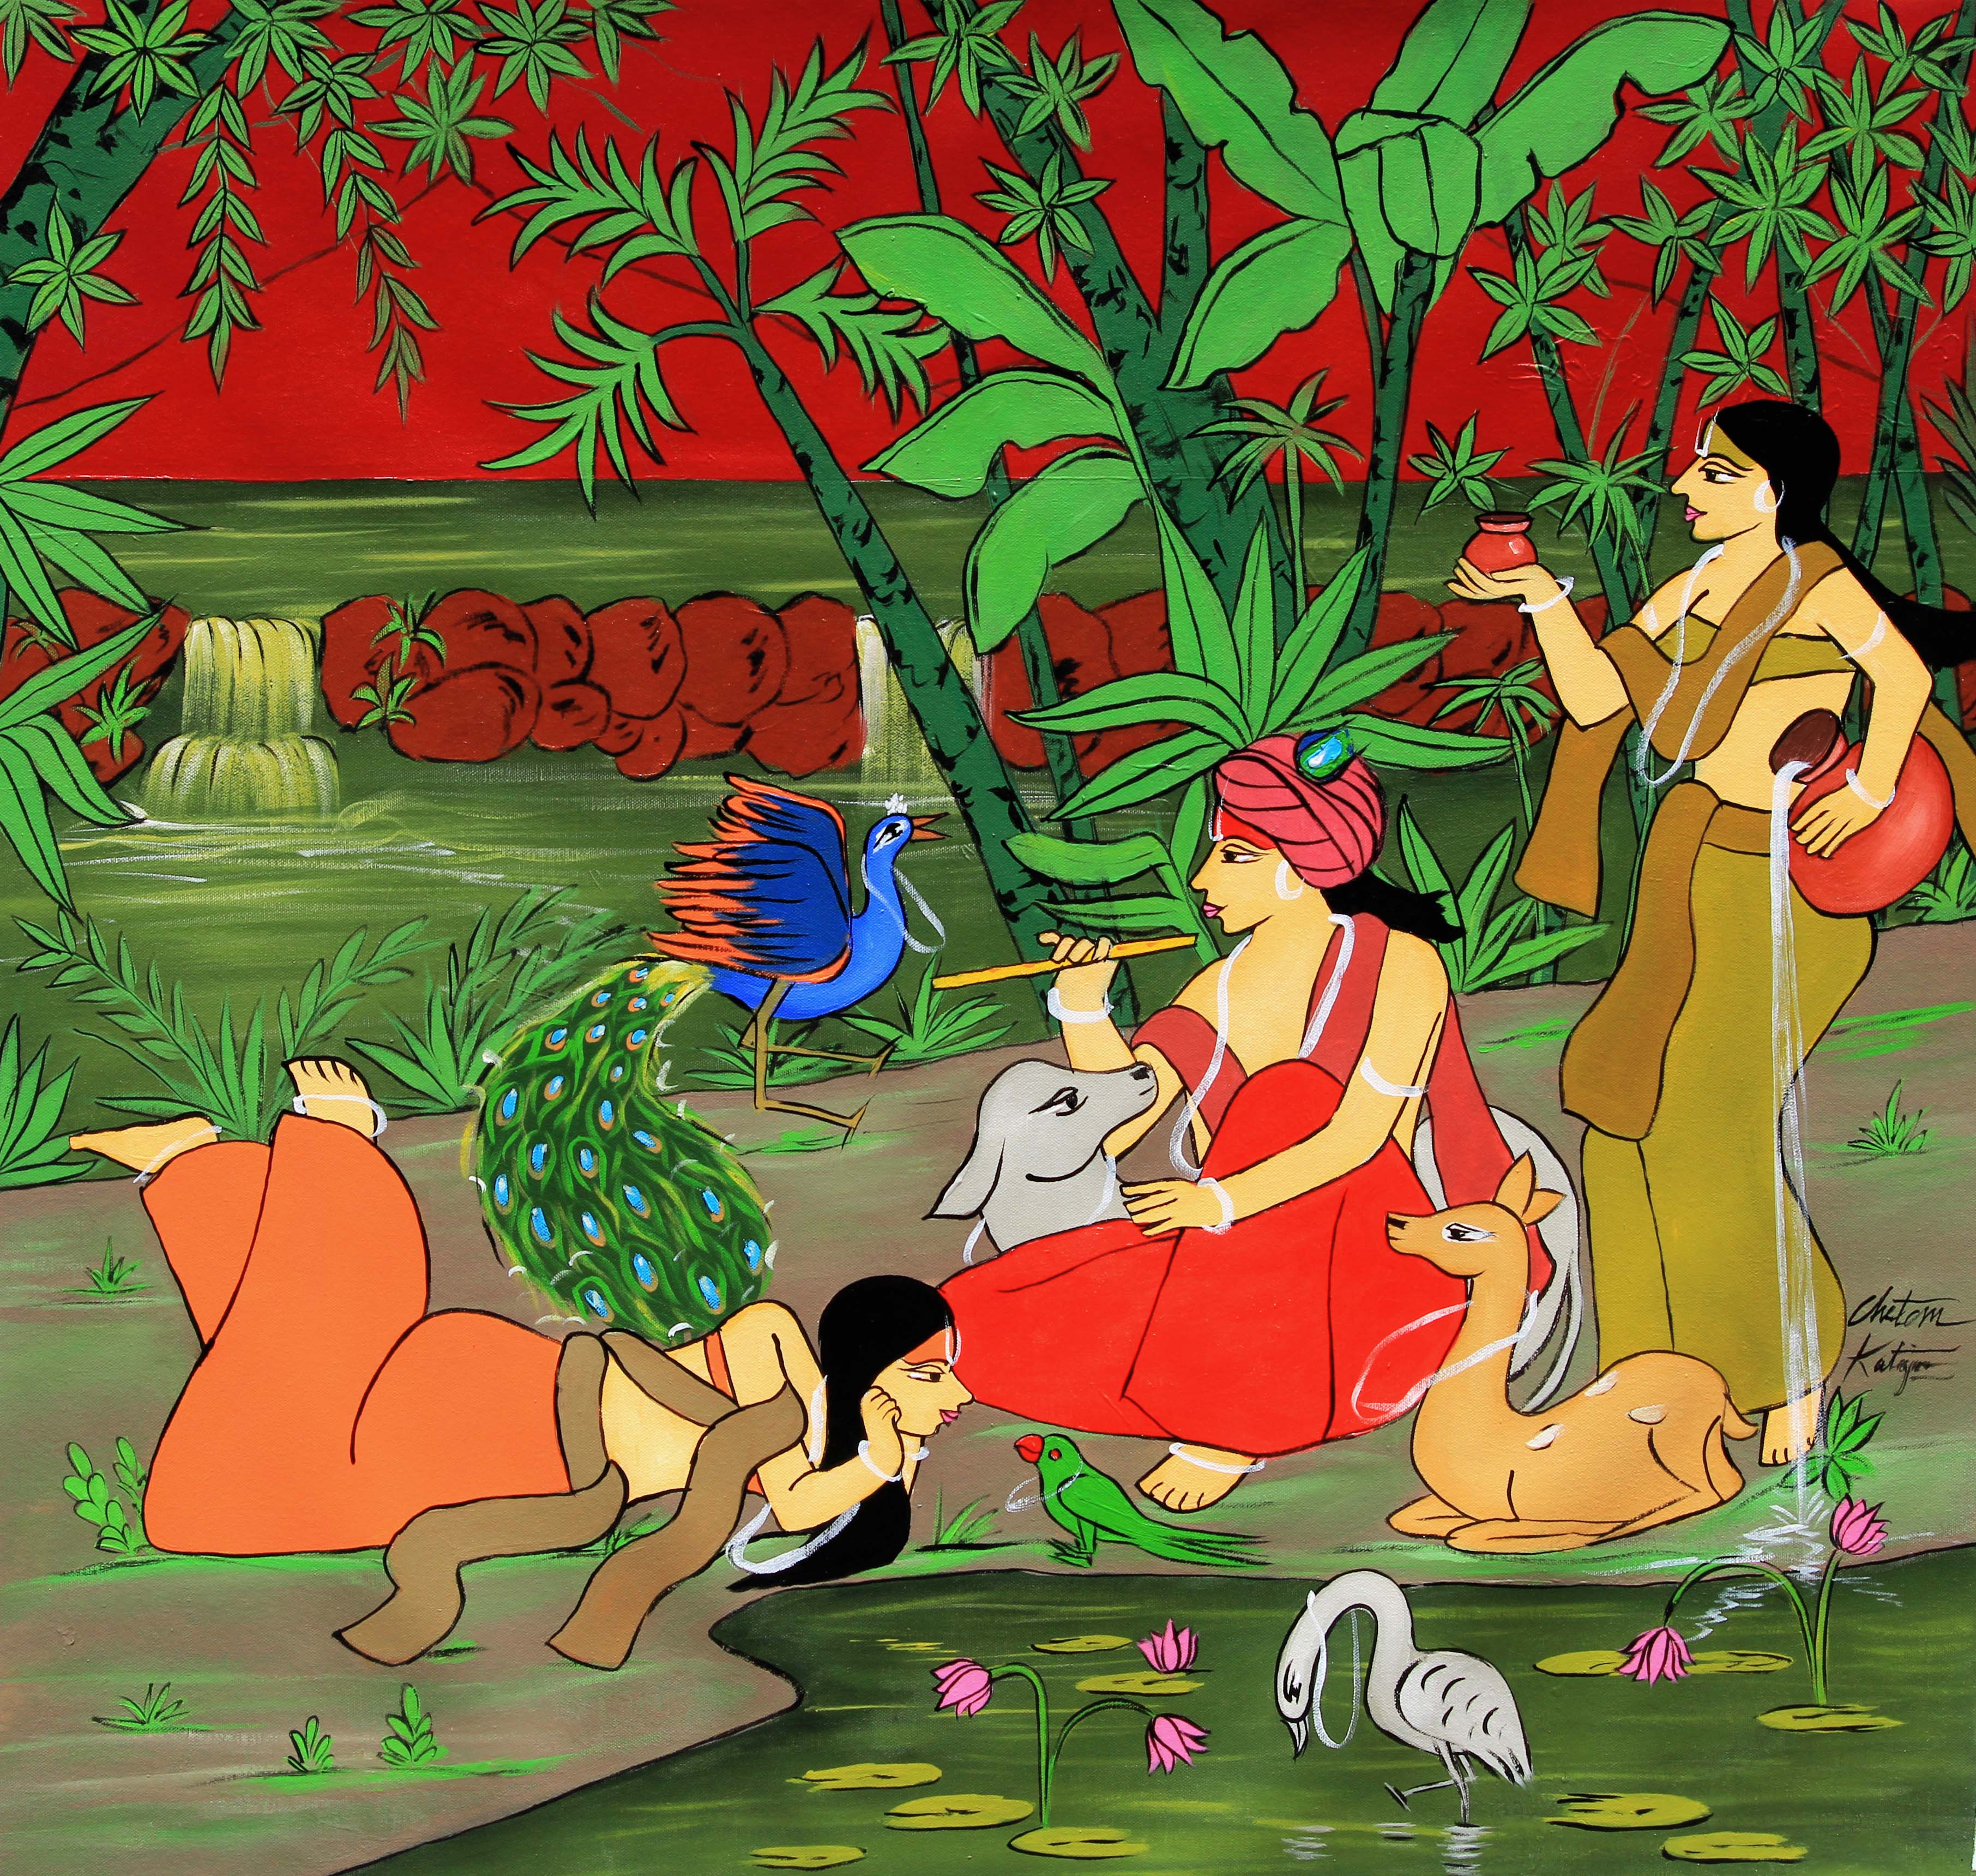 Radha with parrot